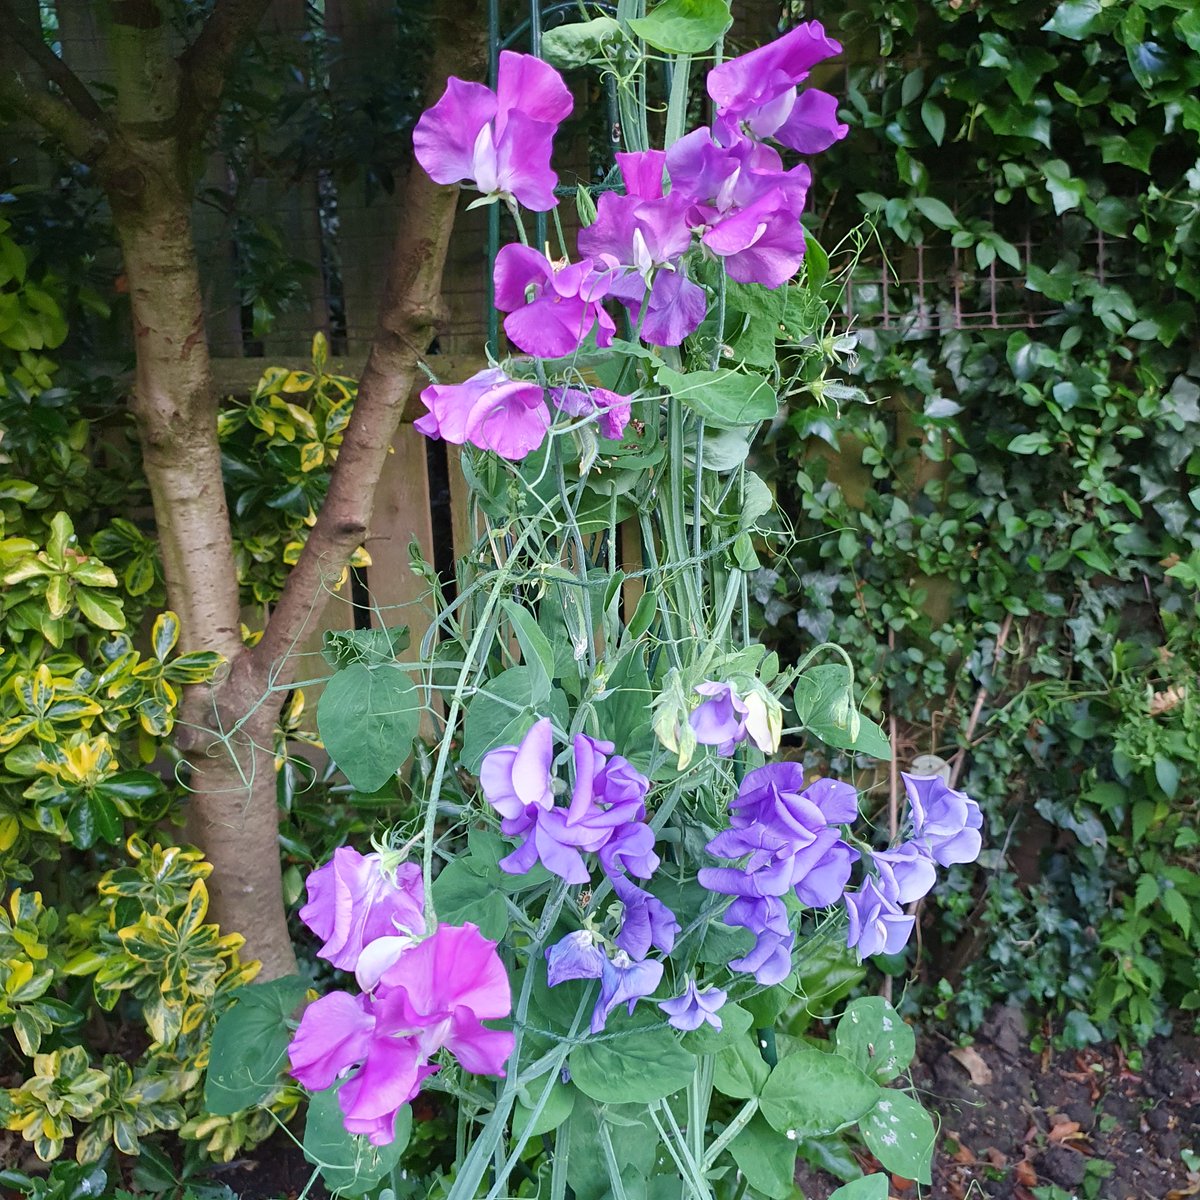 Sweat peas are looking a treat and smelling amazing #sweetpeas #GardeningTwitter